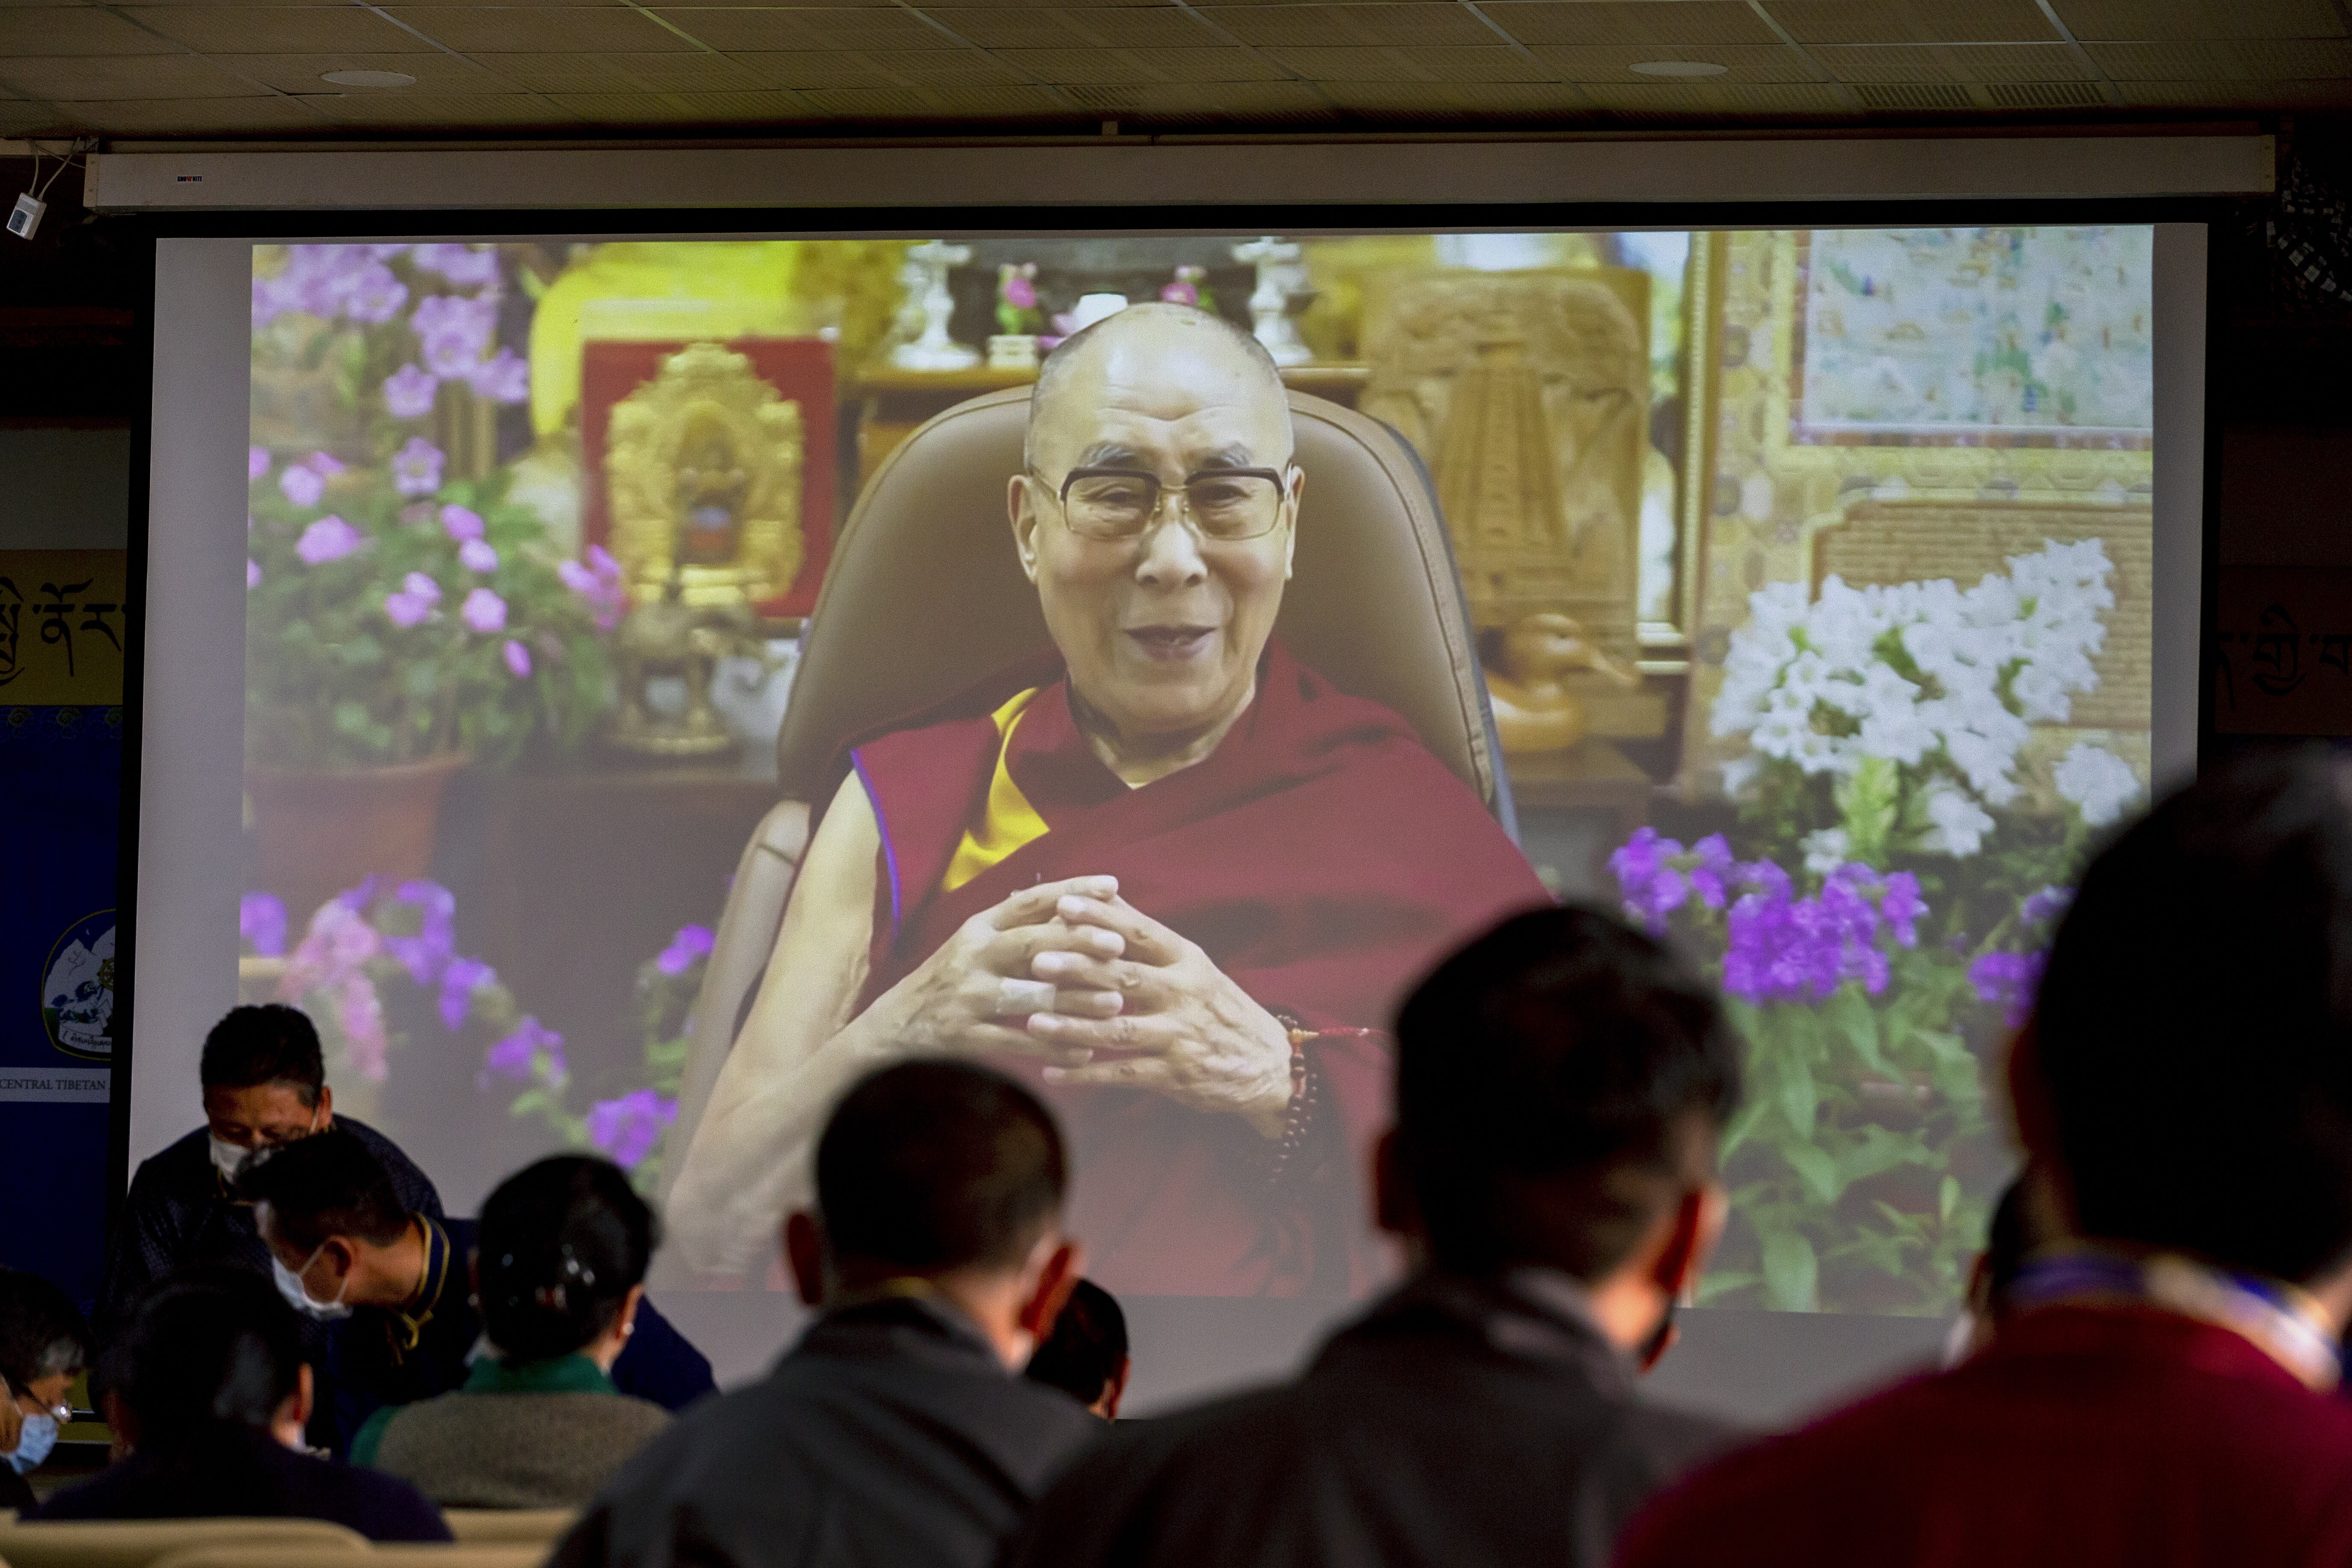 Exiled Tibetan government officials watch a video message from the 14th Dalai Lama in Dharamshala, India, on July 6, 2021. Photo: AP